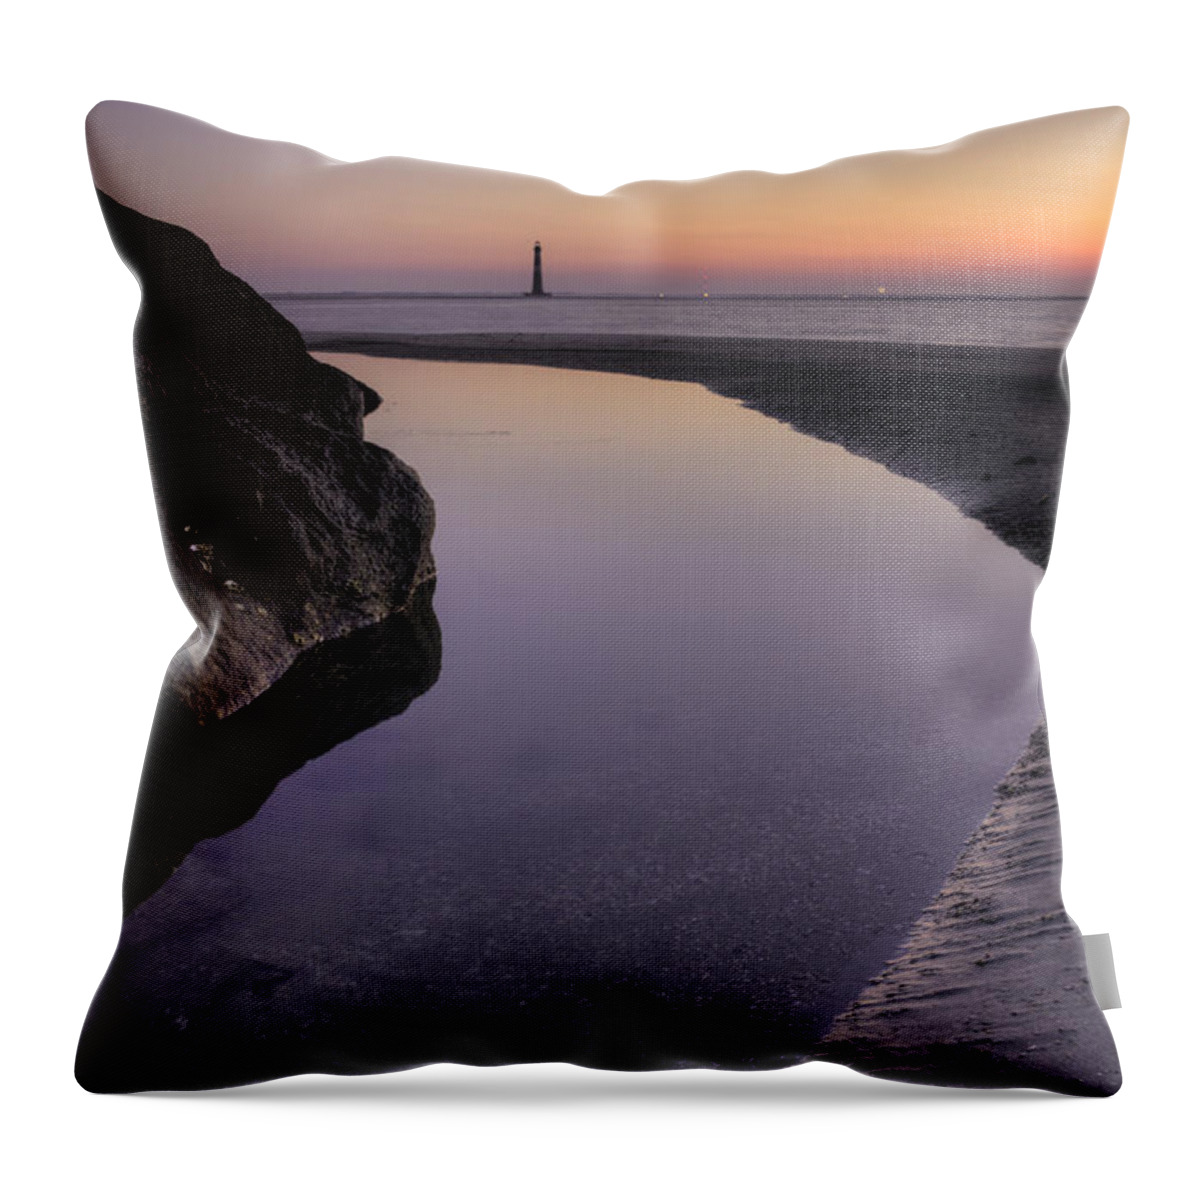 Morris Island Light House Throw Pillow featuring the photograph Dawn Reflections by Dustin K Ryan